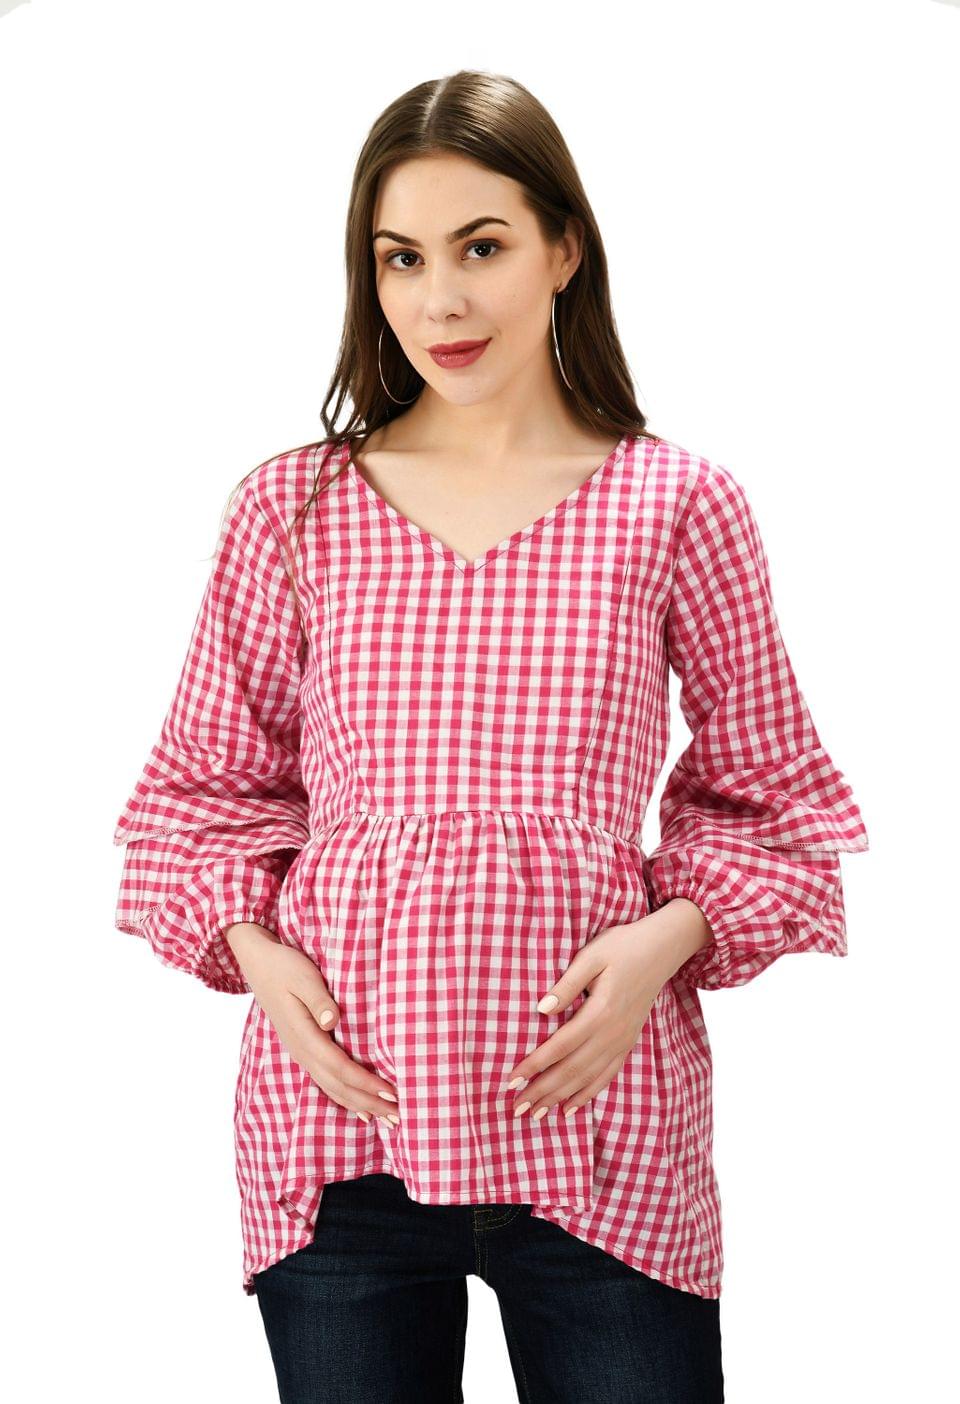 Mometernity Pink and White Cotton Check Print Ruffle Sleeves Maternity and Nursing Top